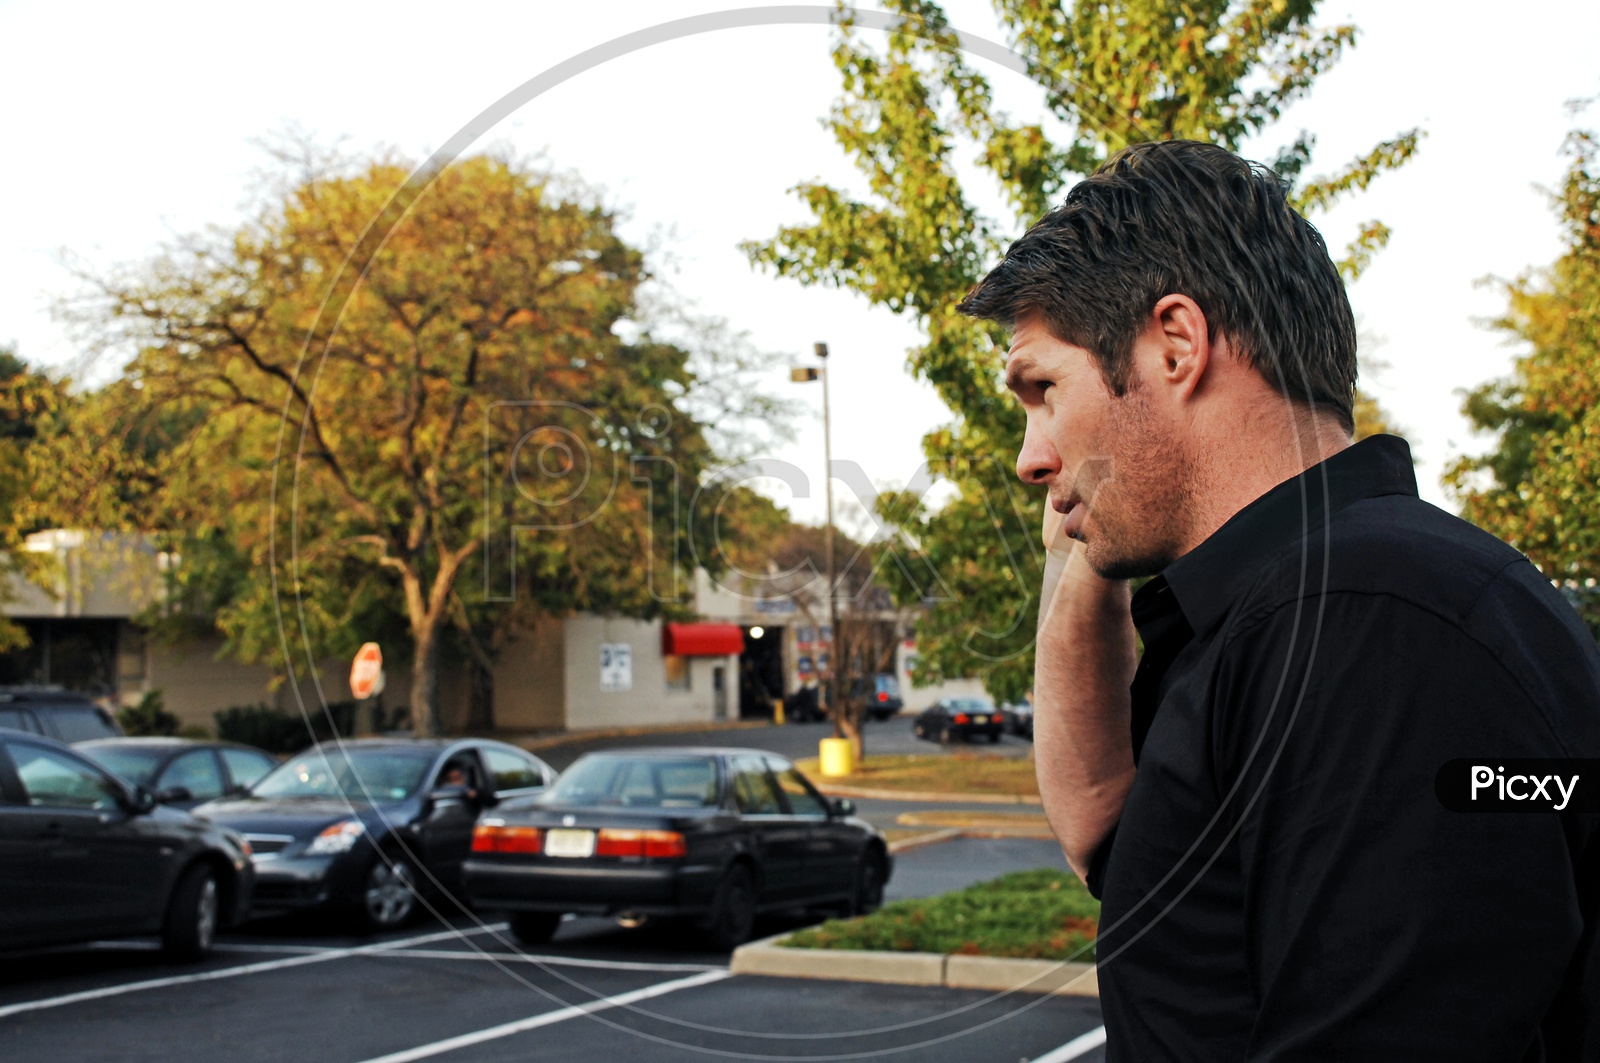 A man talking over a phone on the road